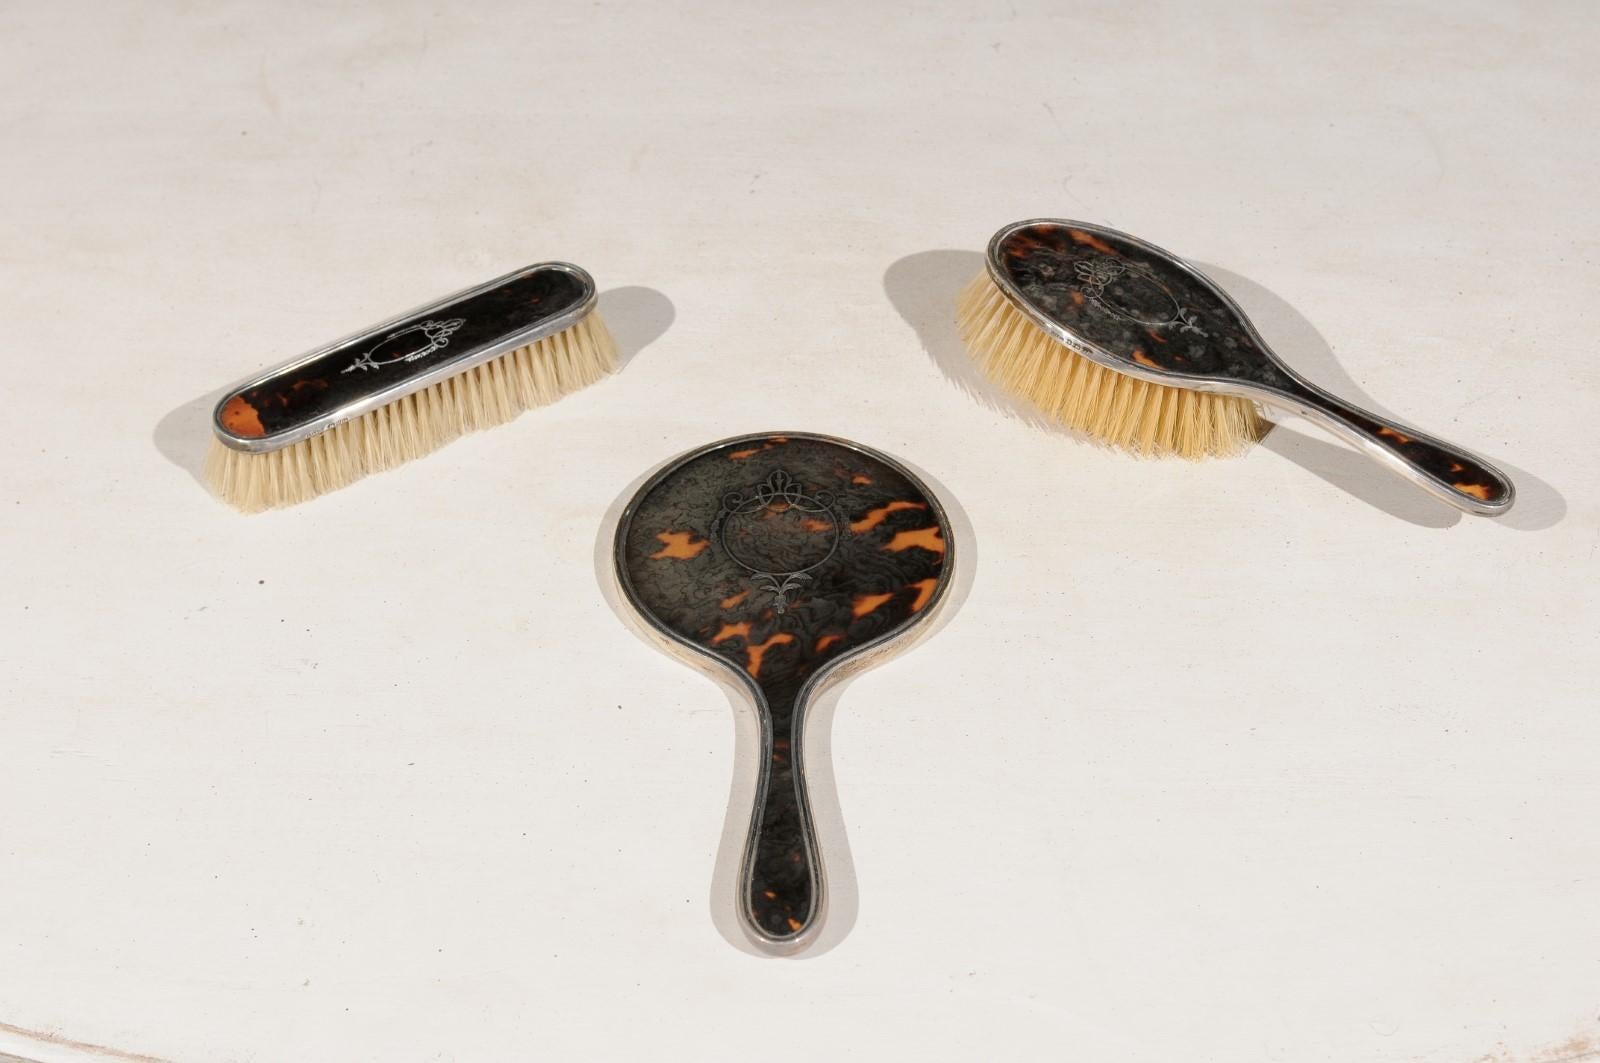 An English Edwardian period dressing table hand mirror, hair and clothes brushes from the early 20th century with silver piqué décor of garlands and medallions. Born in England during the early years of the 20th century, this exquisite set of hand